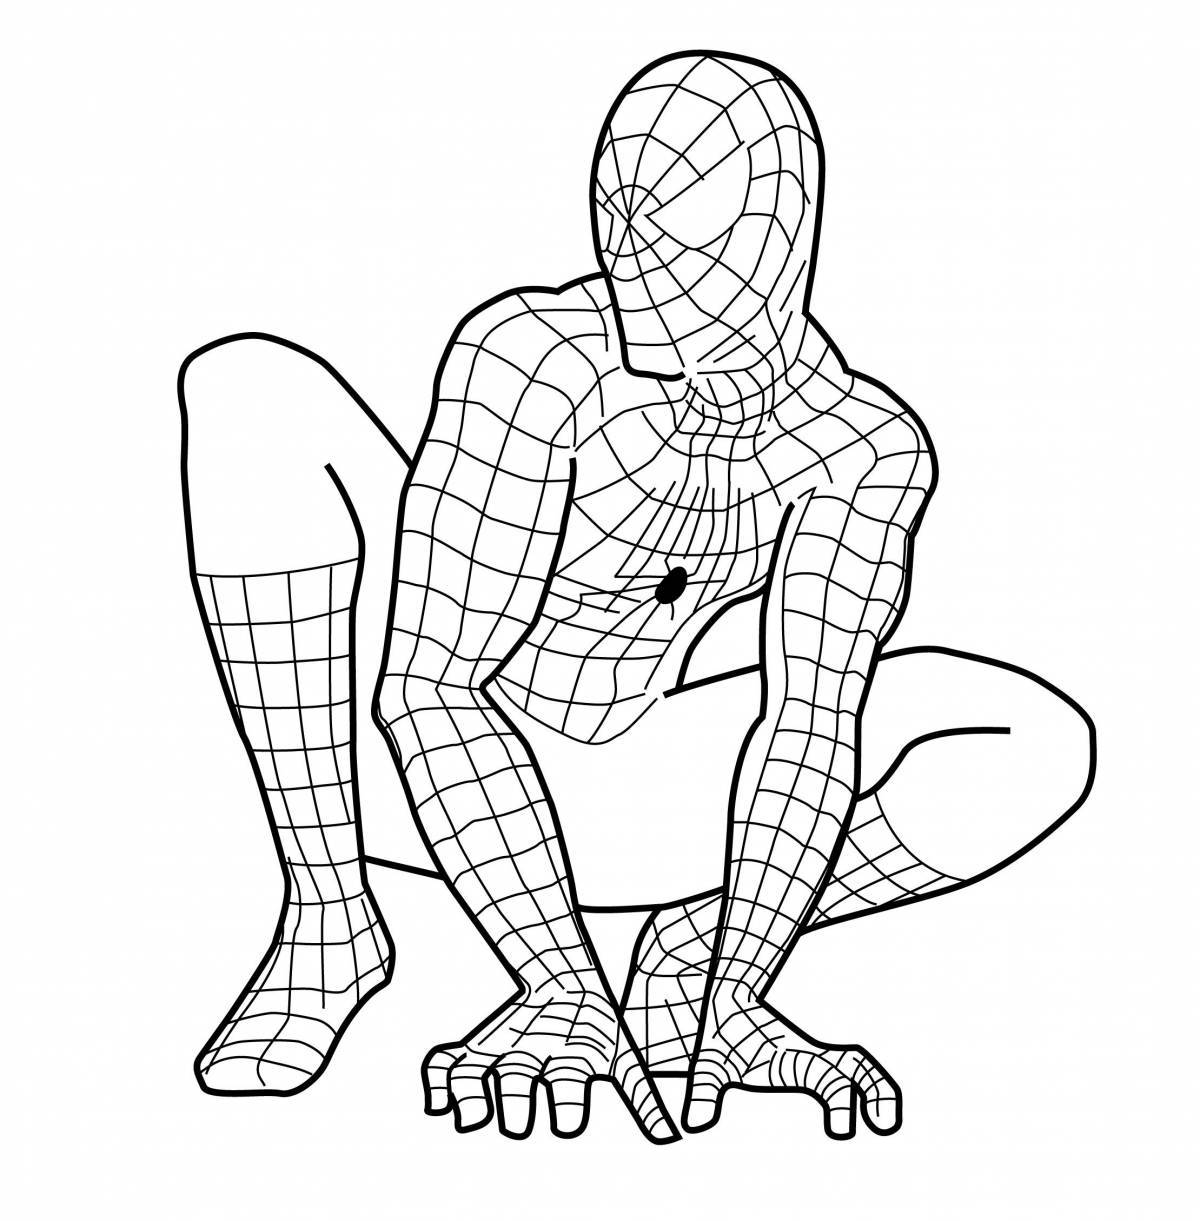 Adorable Spiderman coloring pages for kids